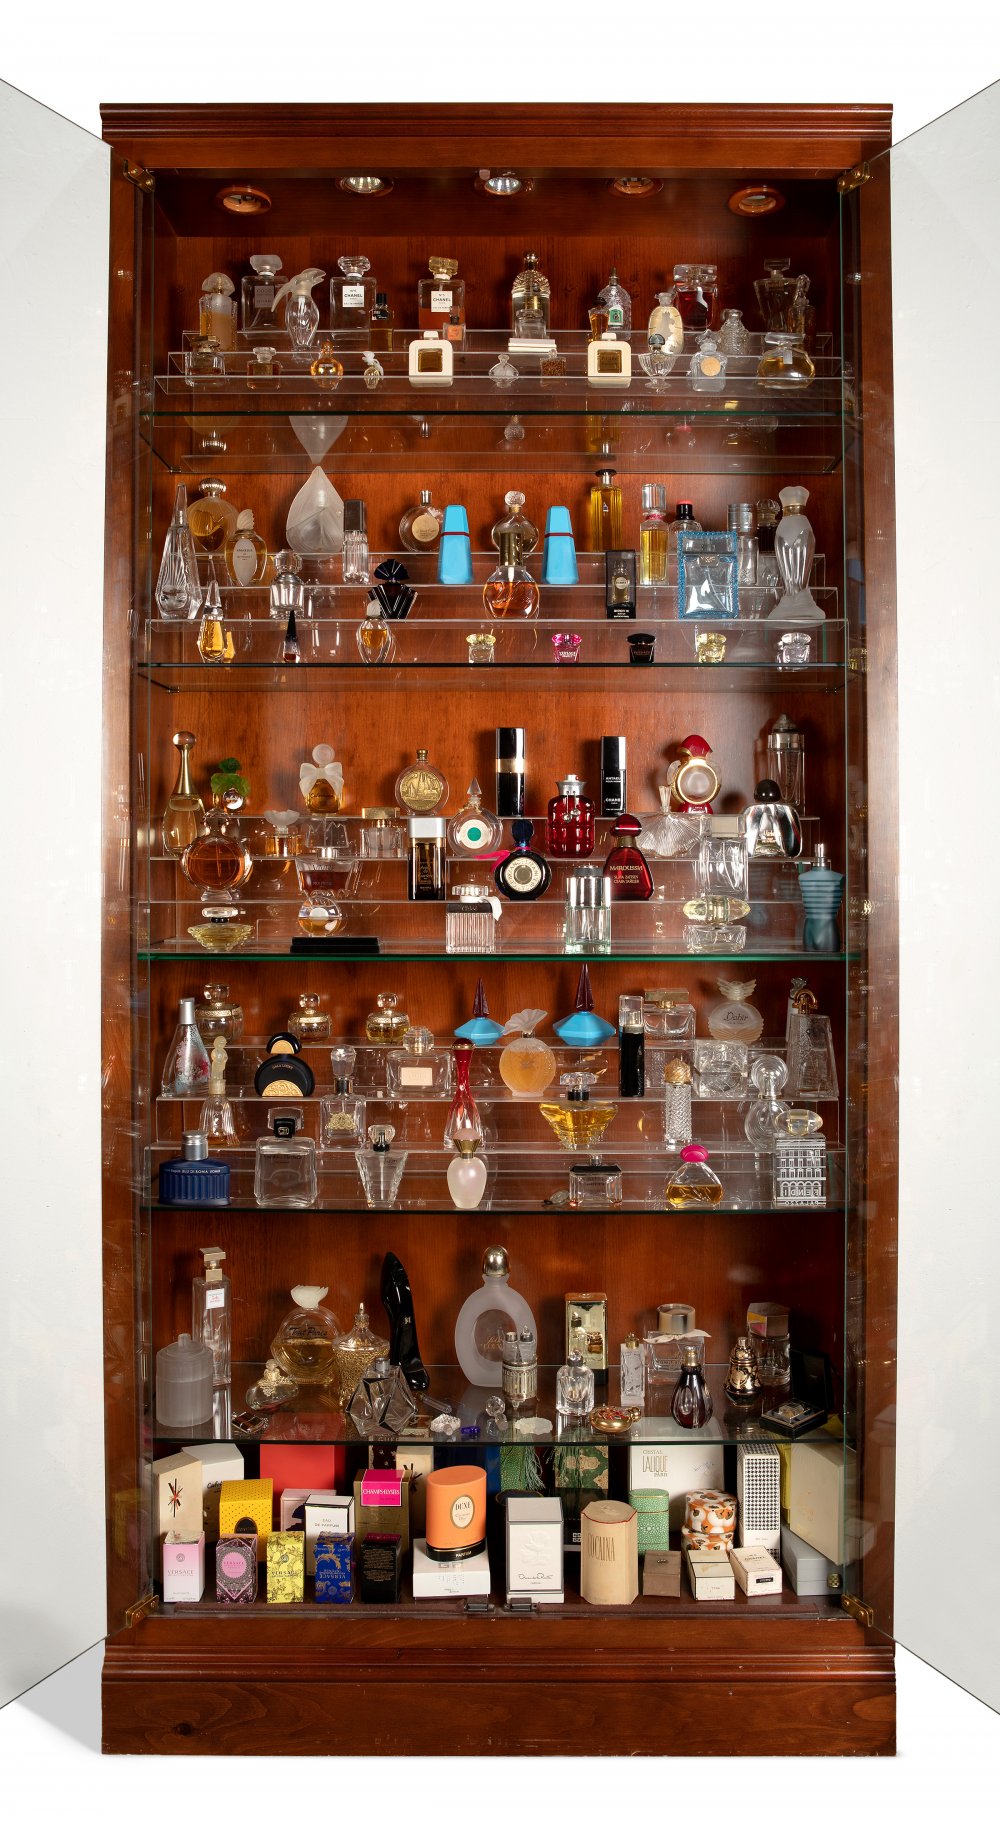 Collection of perfumes and perfumers, from 1925 to the present day.Provenance: Private Spanish